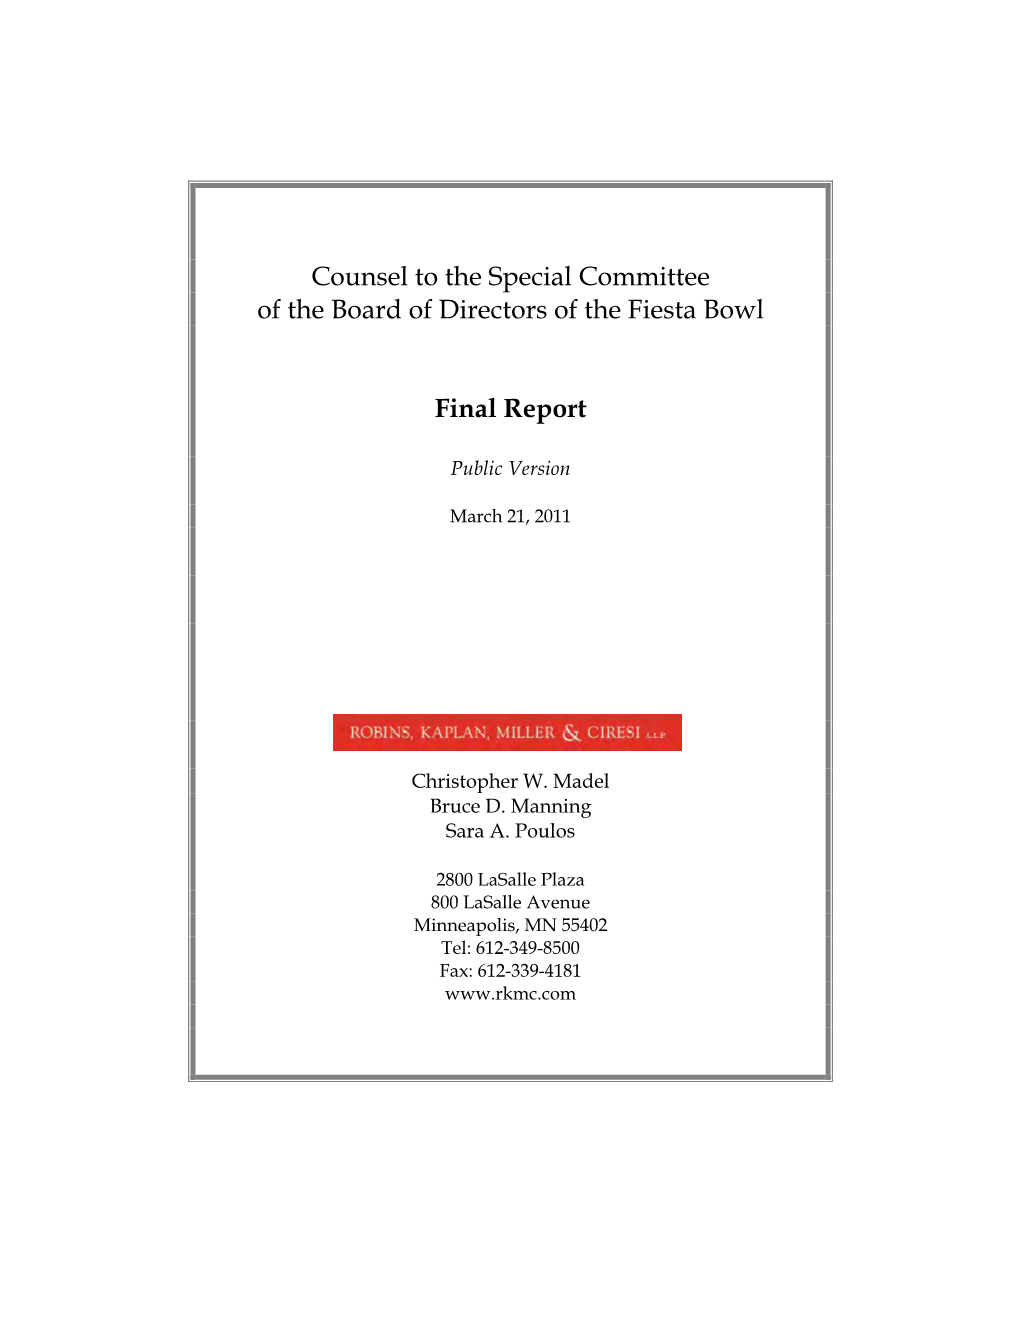 Counsel to the Special Committee of the Board of Directors of the Fiesta Bowl